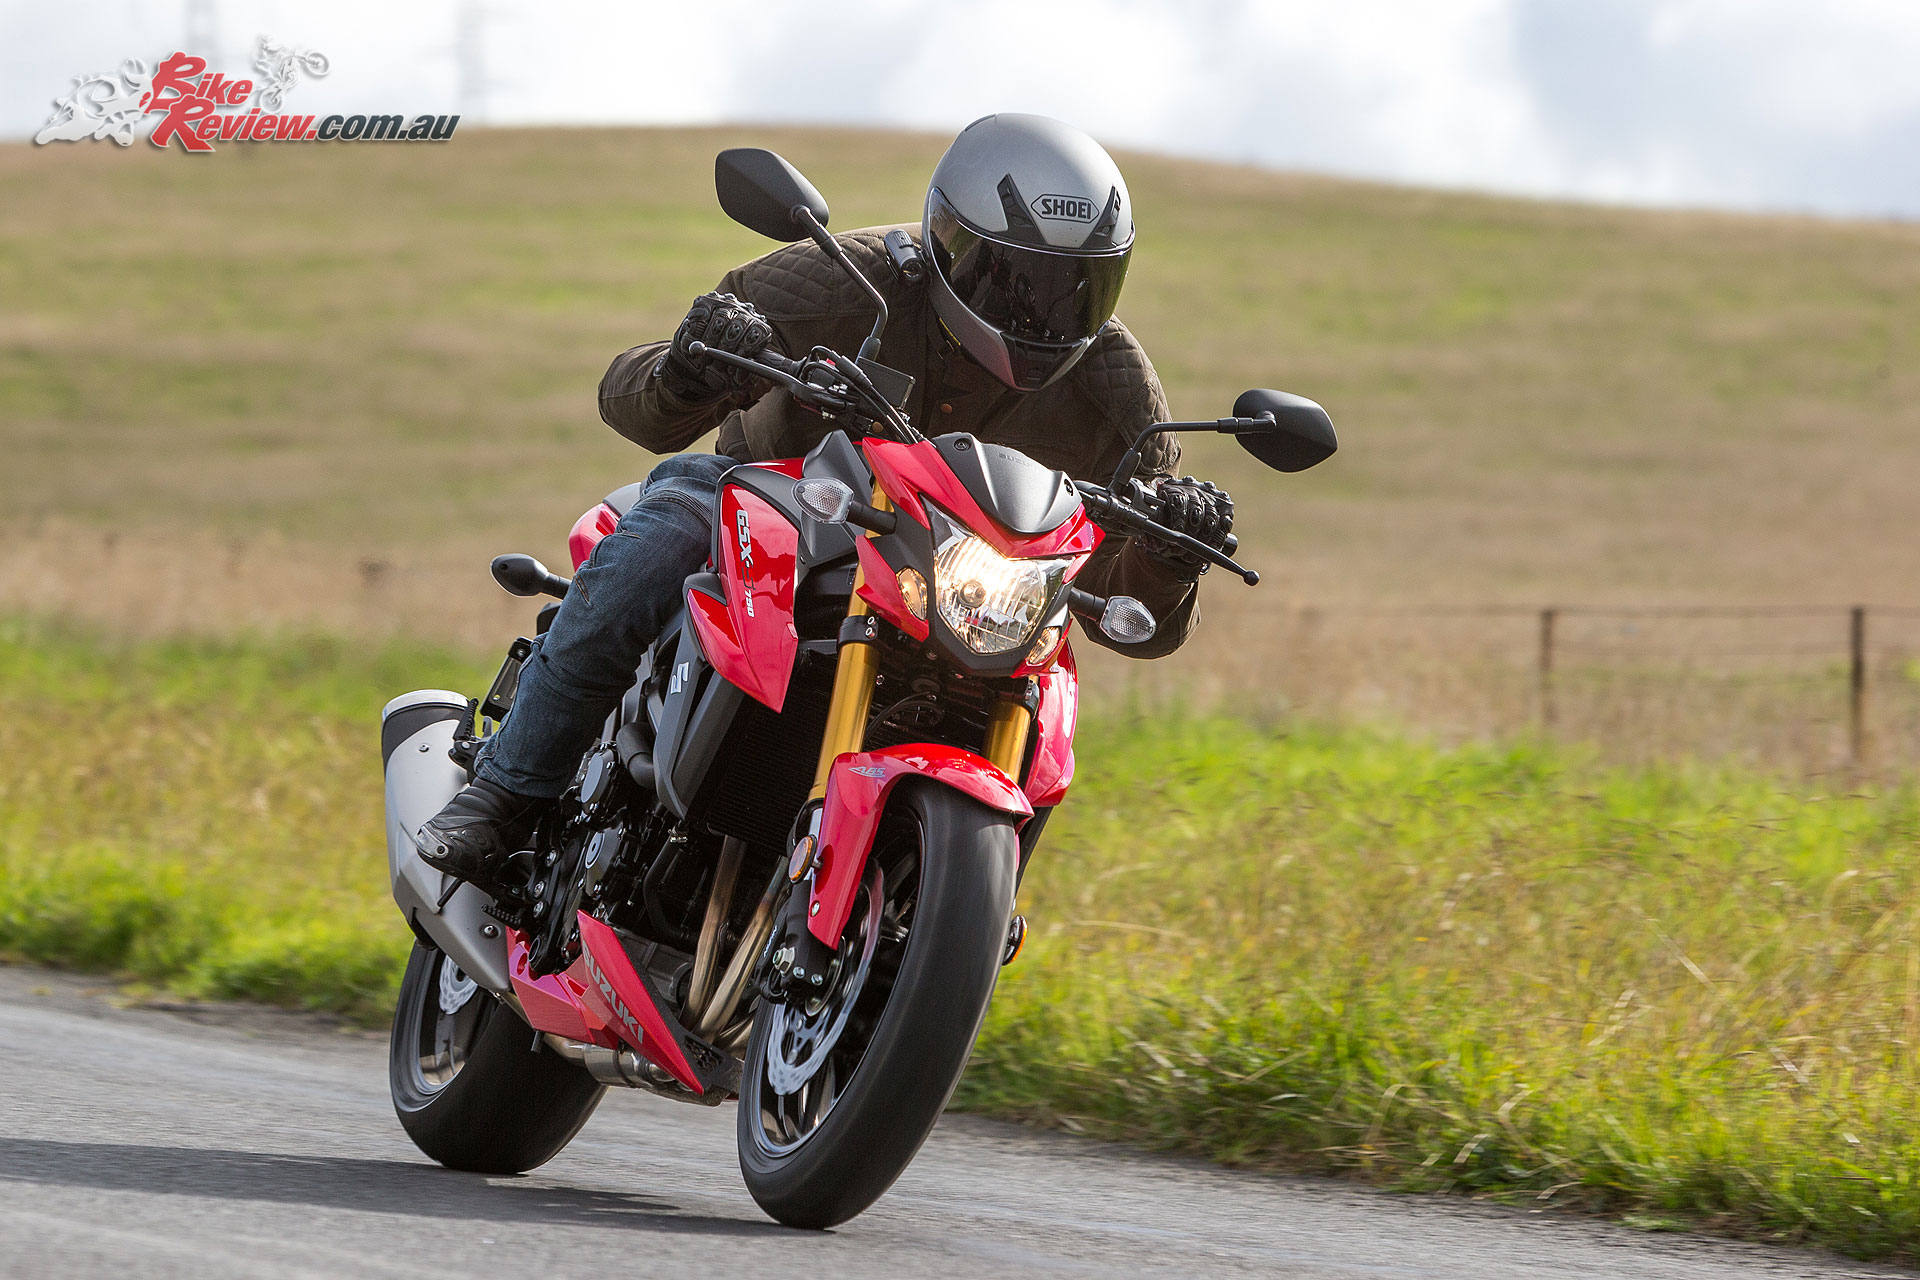 The GSX-S750 is based on the outgoing GSR but so heavily revised it is basically an all-new bike. 